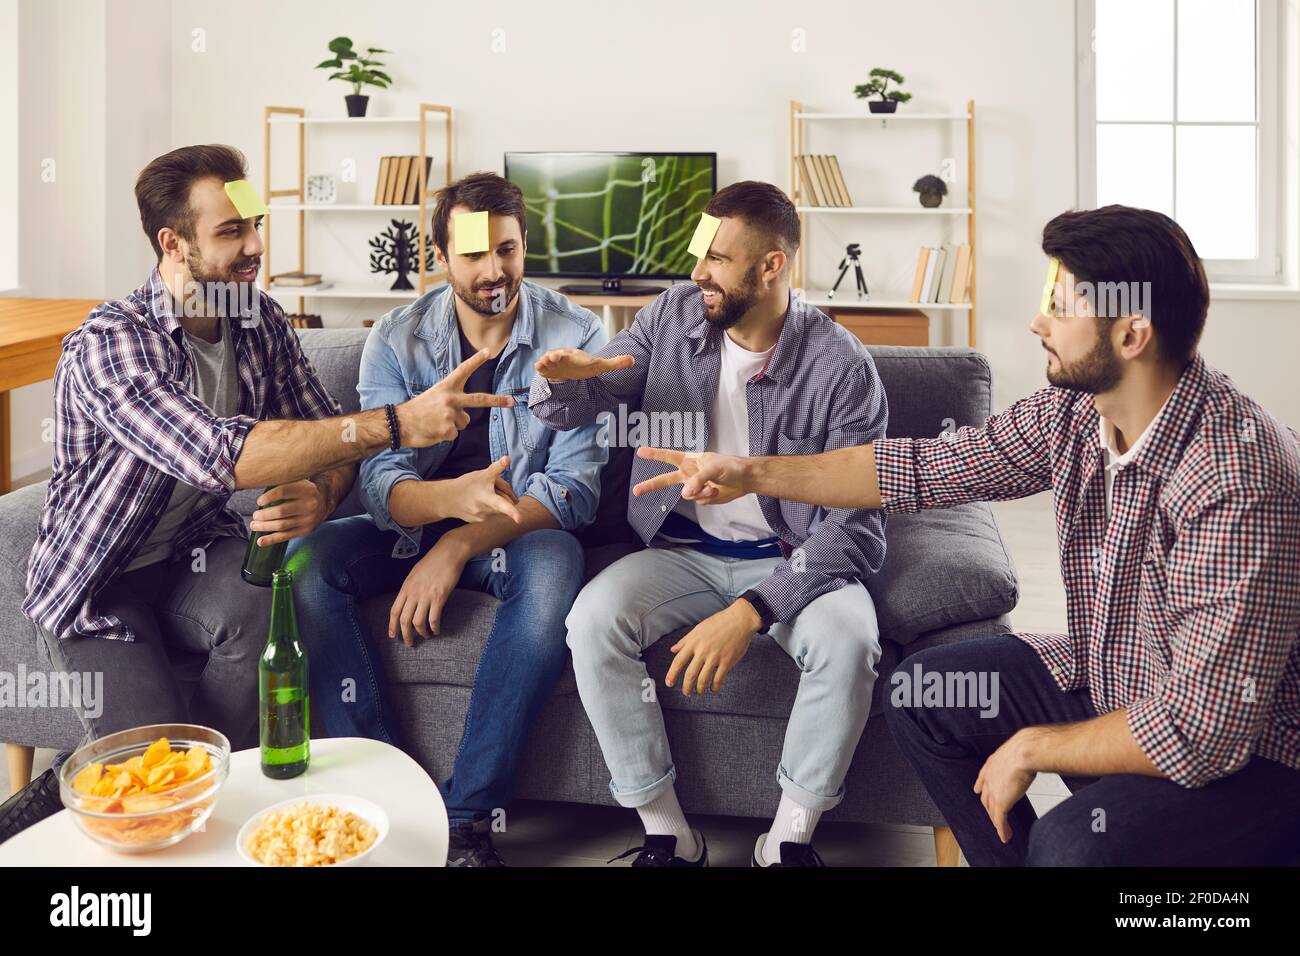 Bunch of young friends having a party, playing games and enjoying fun time together Stock Photo